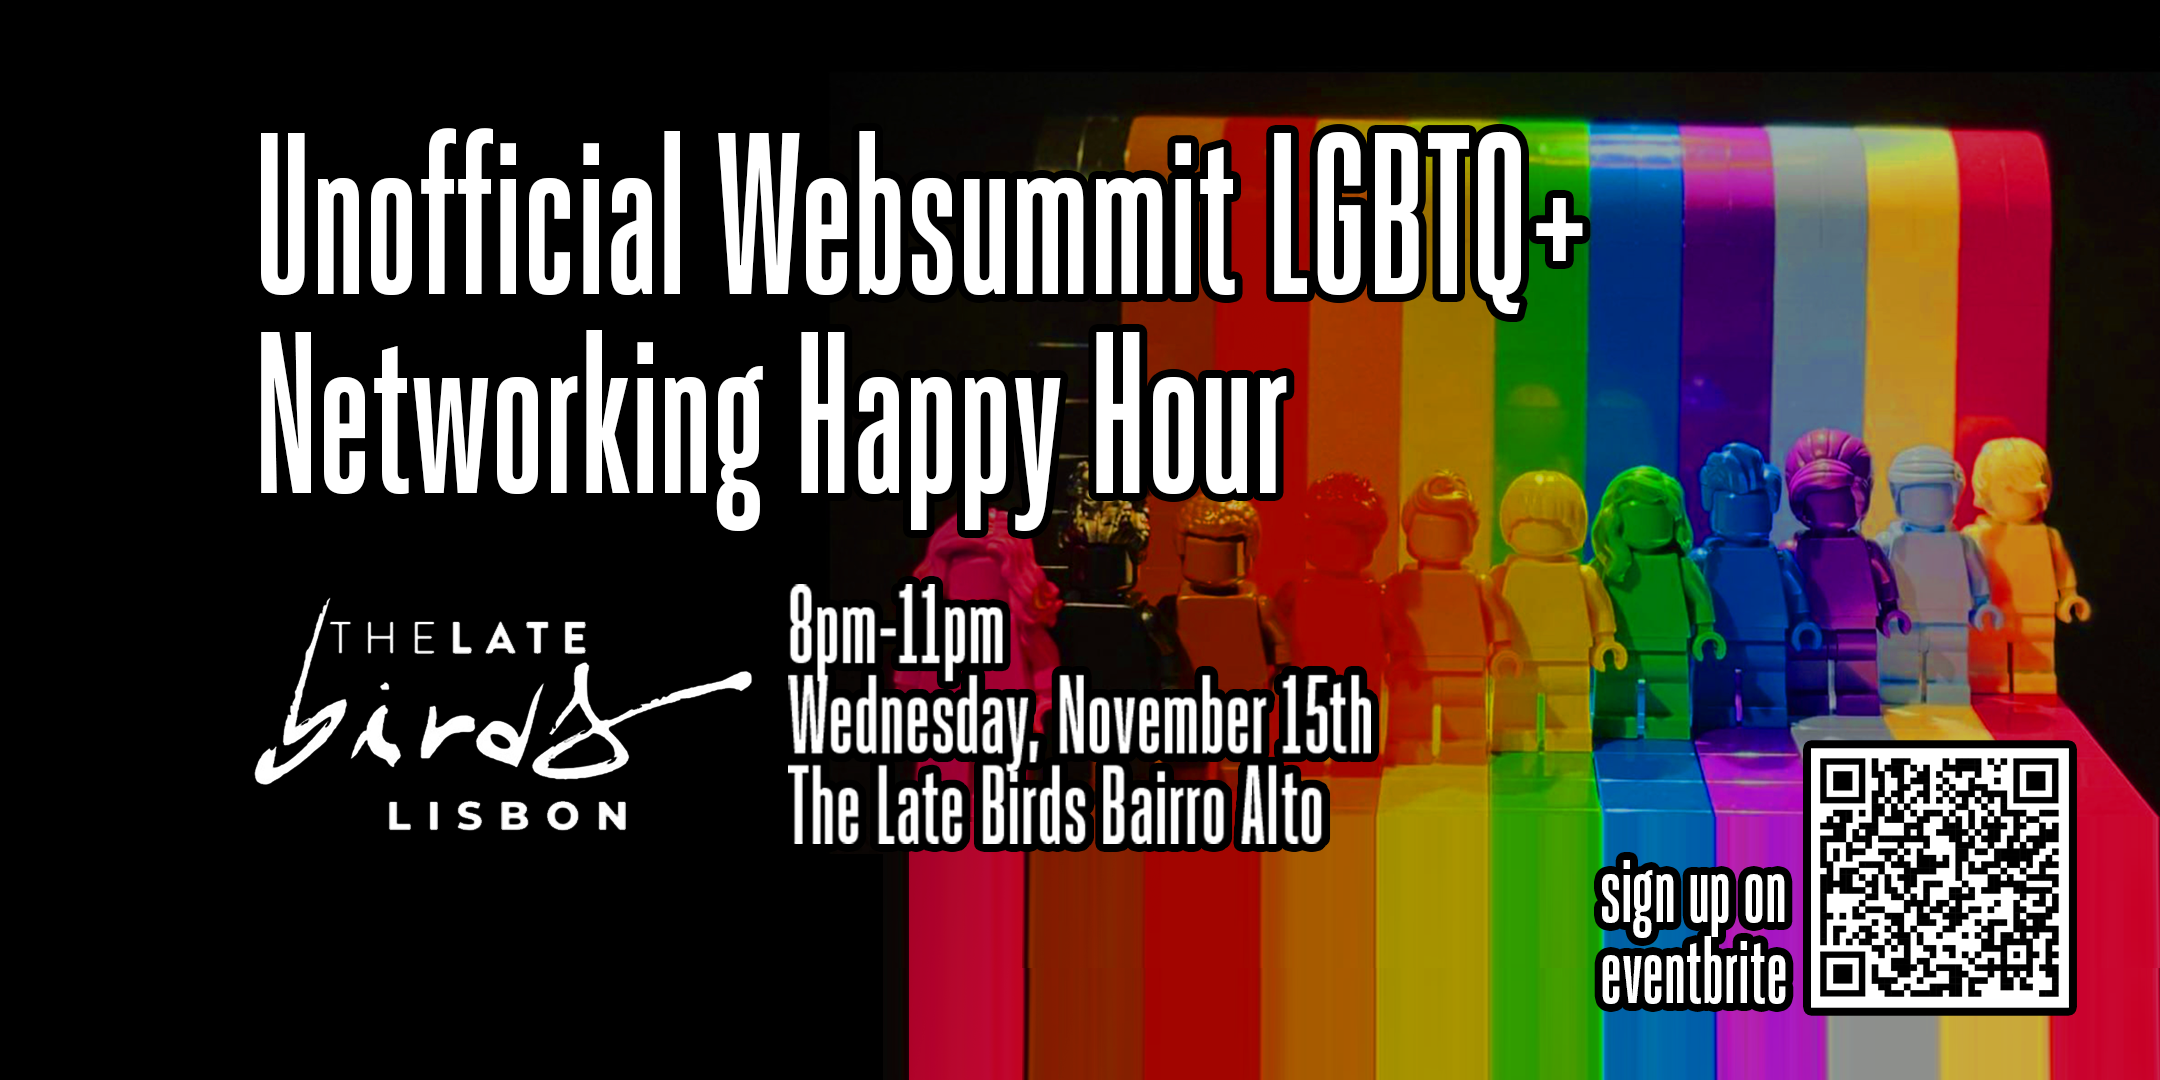 LGBTQ+ Unofficial Websummit Networking Happy Hour